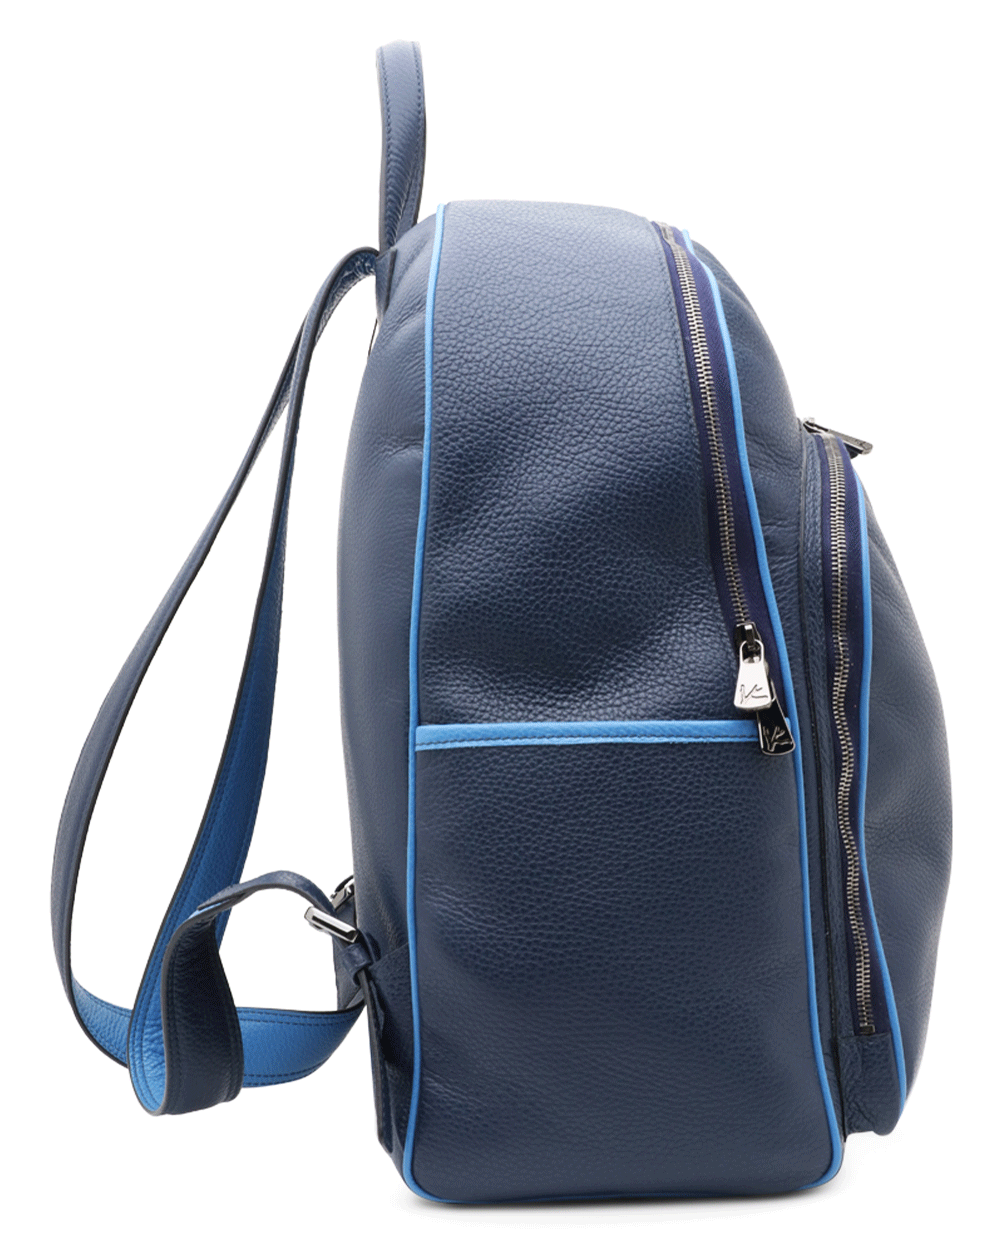 Navy and Bright Blue Grained Leather Backpack